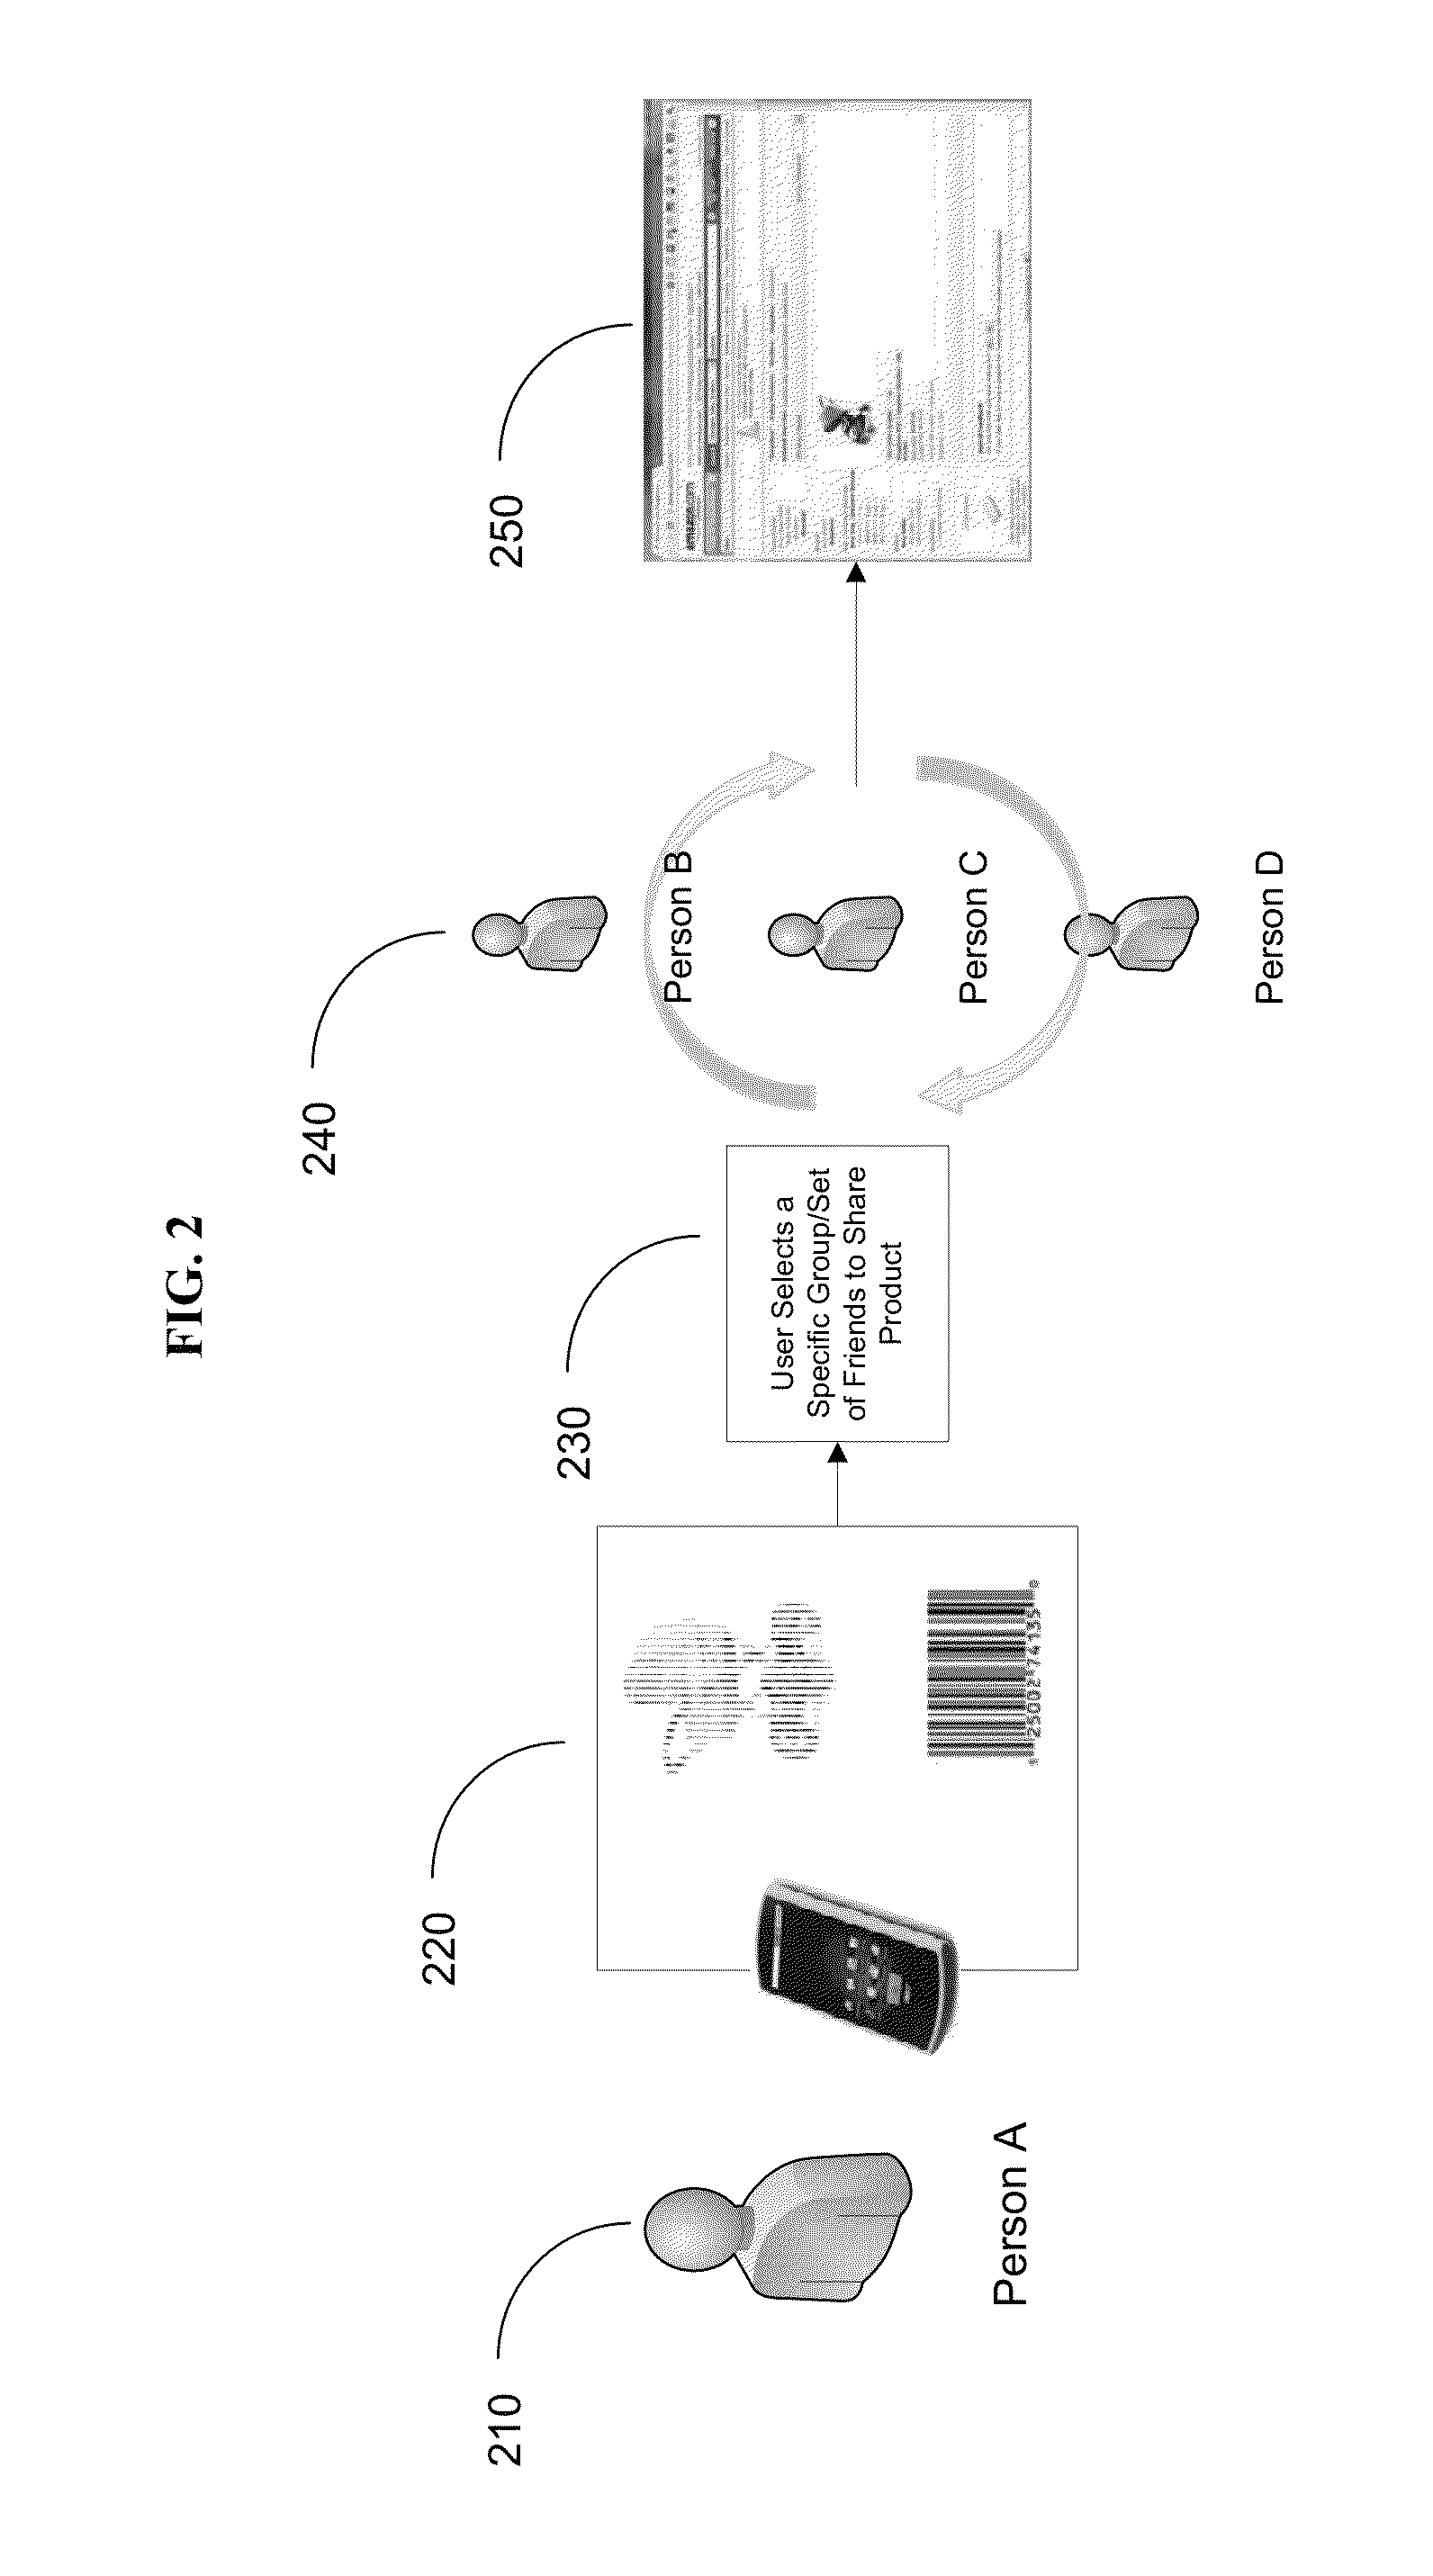 Method and system for sharing information